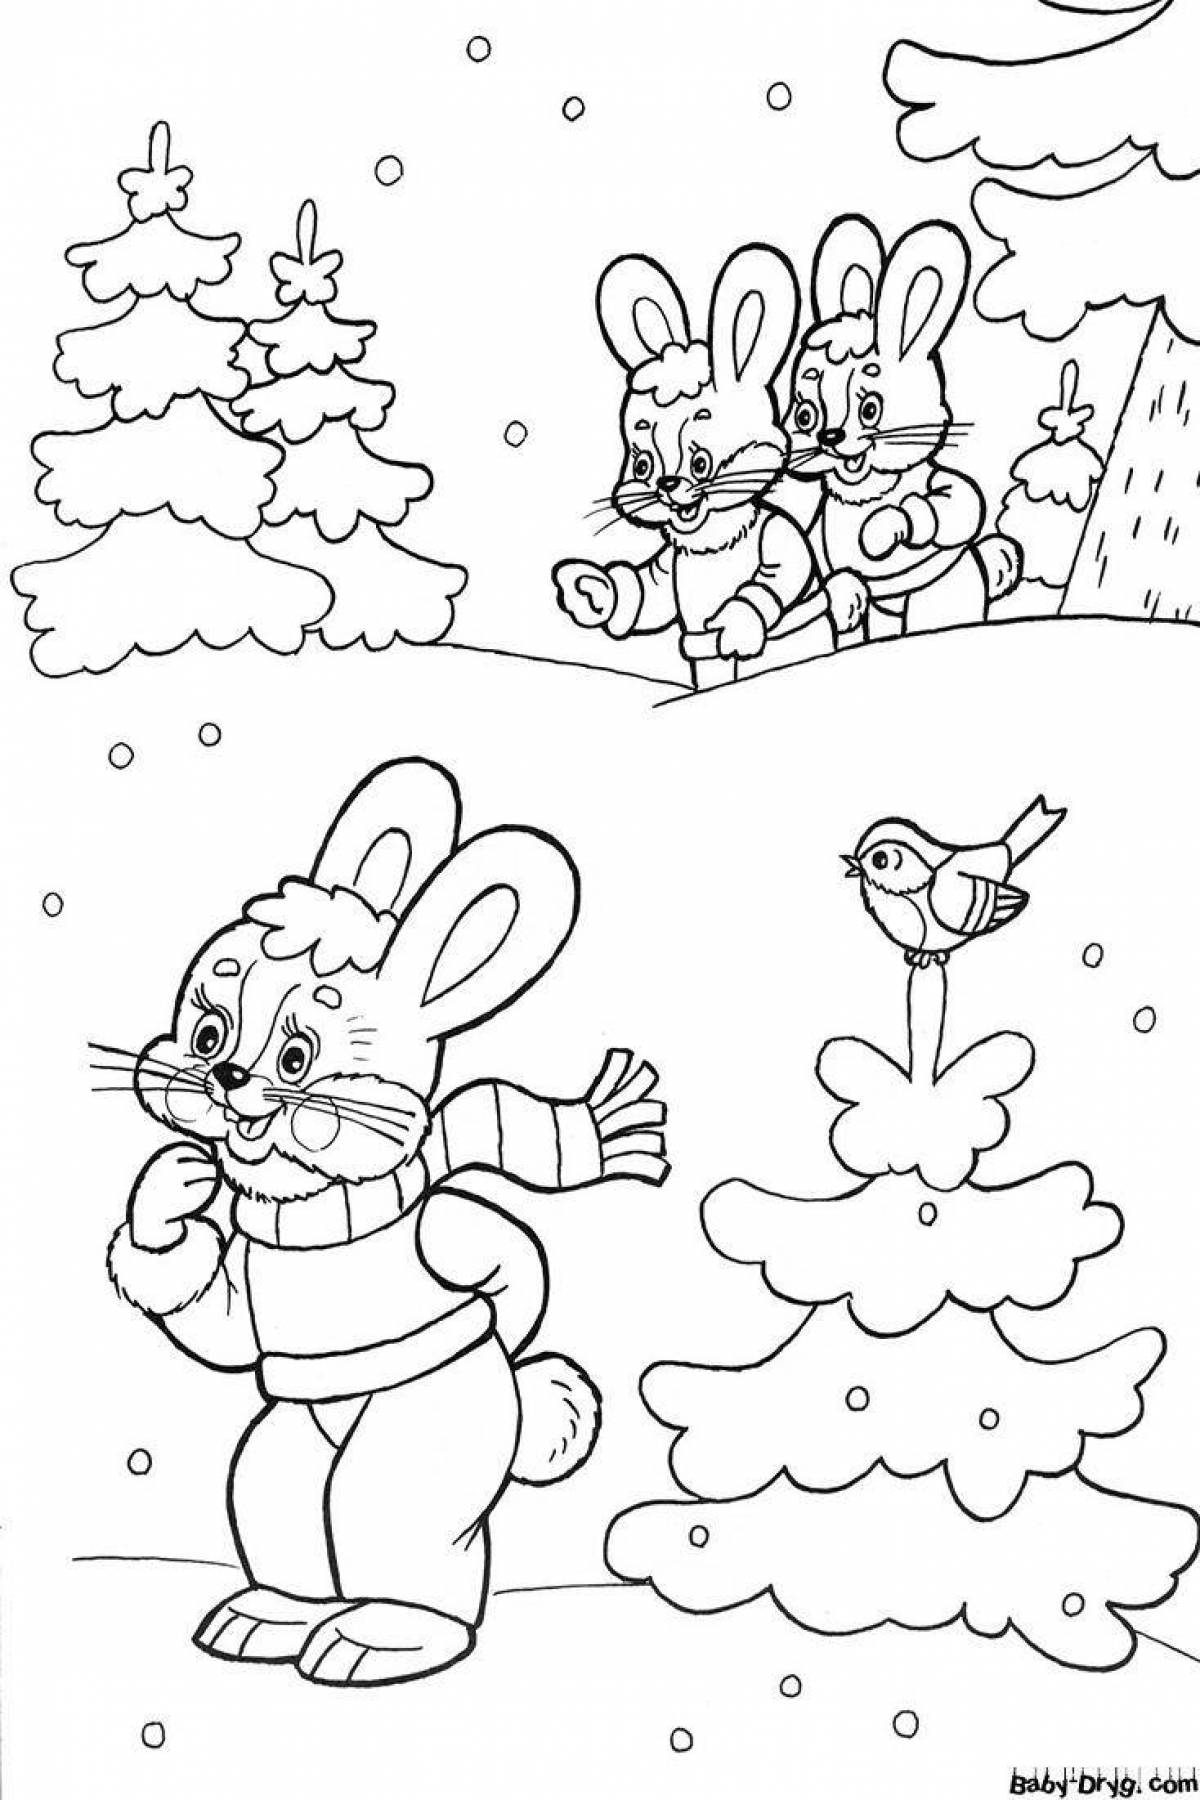 Gorgeous new year bunny coloring book